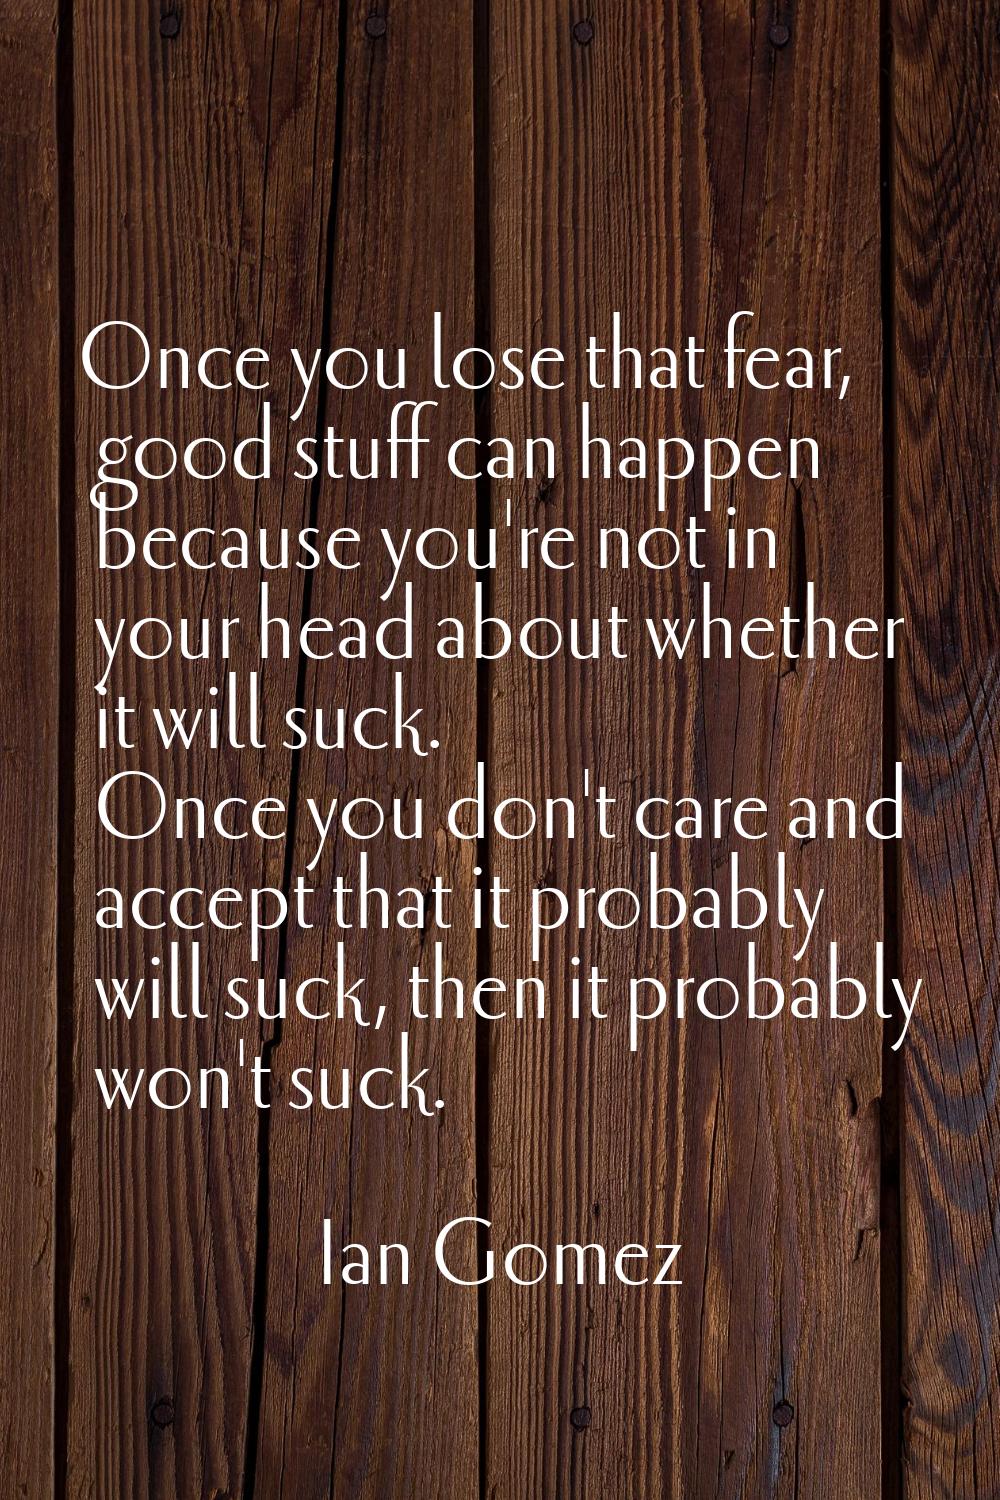 Once you lose that fear, good stuff can happen because you're not in your head about whether it wil